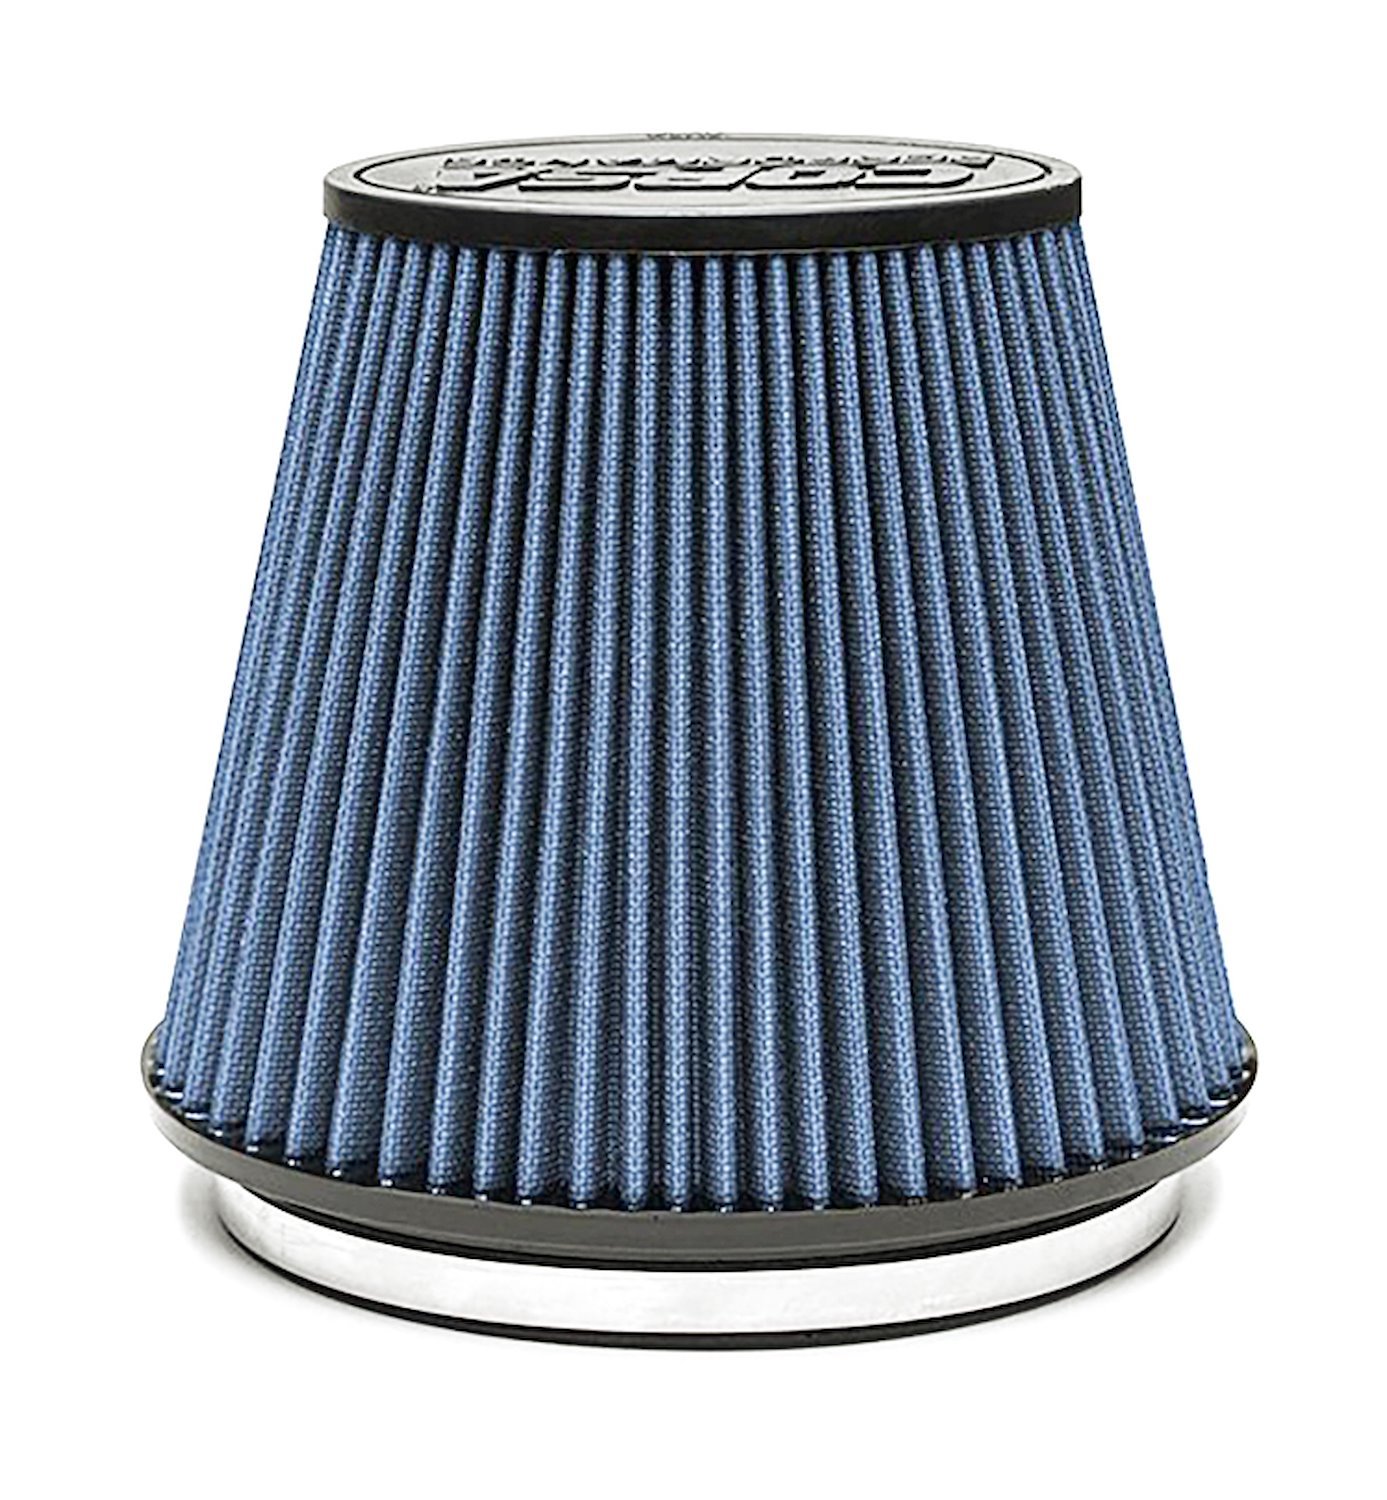 Maxflow5 Oiled Replacement Air Filter for 44001, 44002